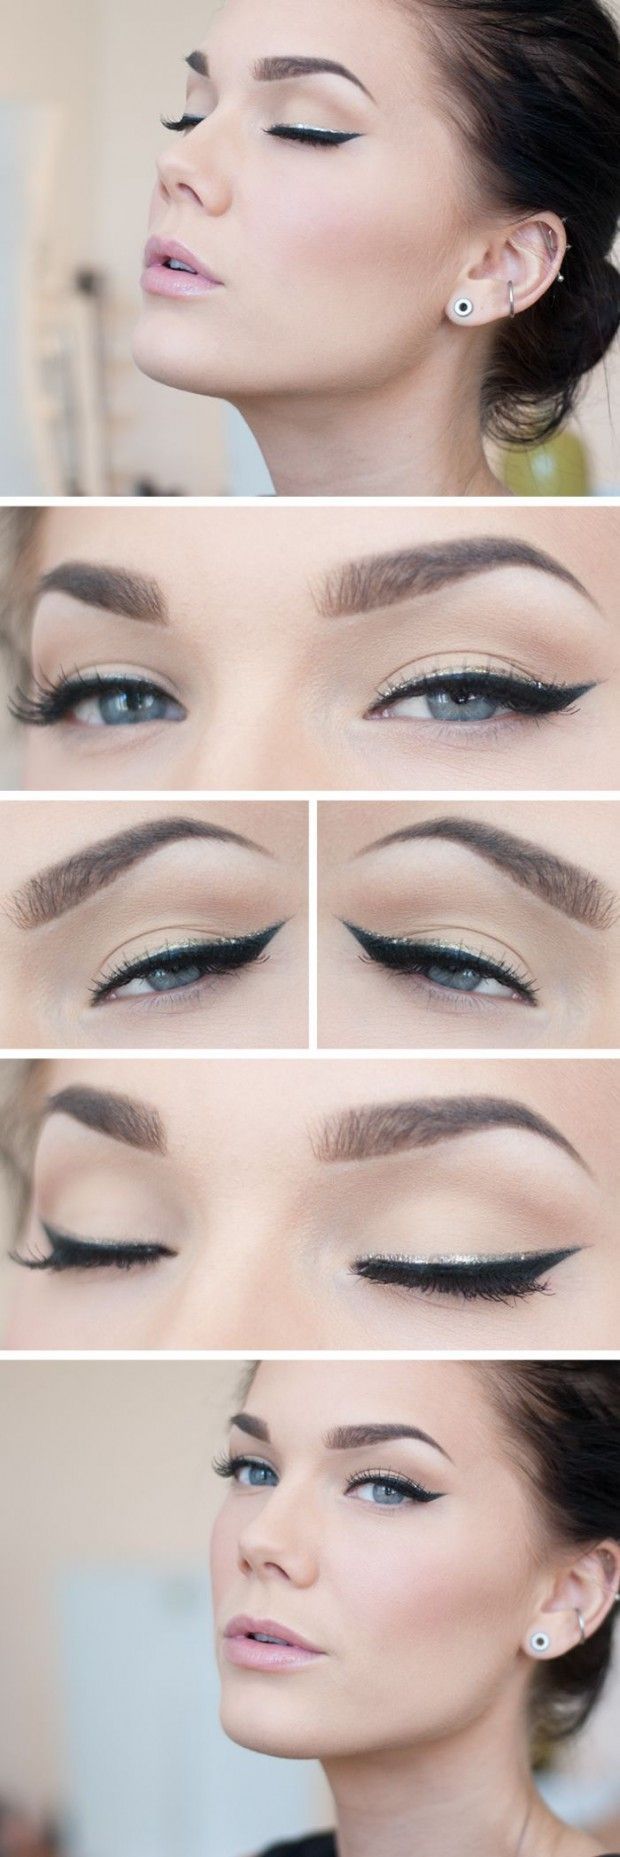 The black cat eyeliner is classic and the gold line above adds a special detail which can match your accessories and bring out